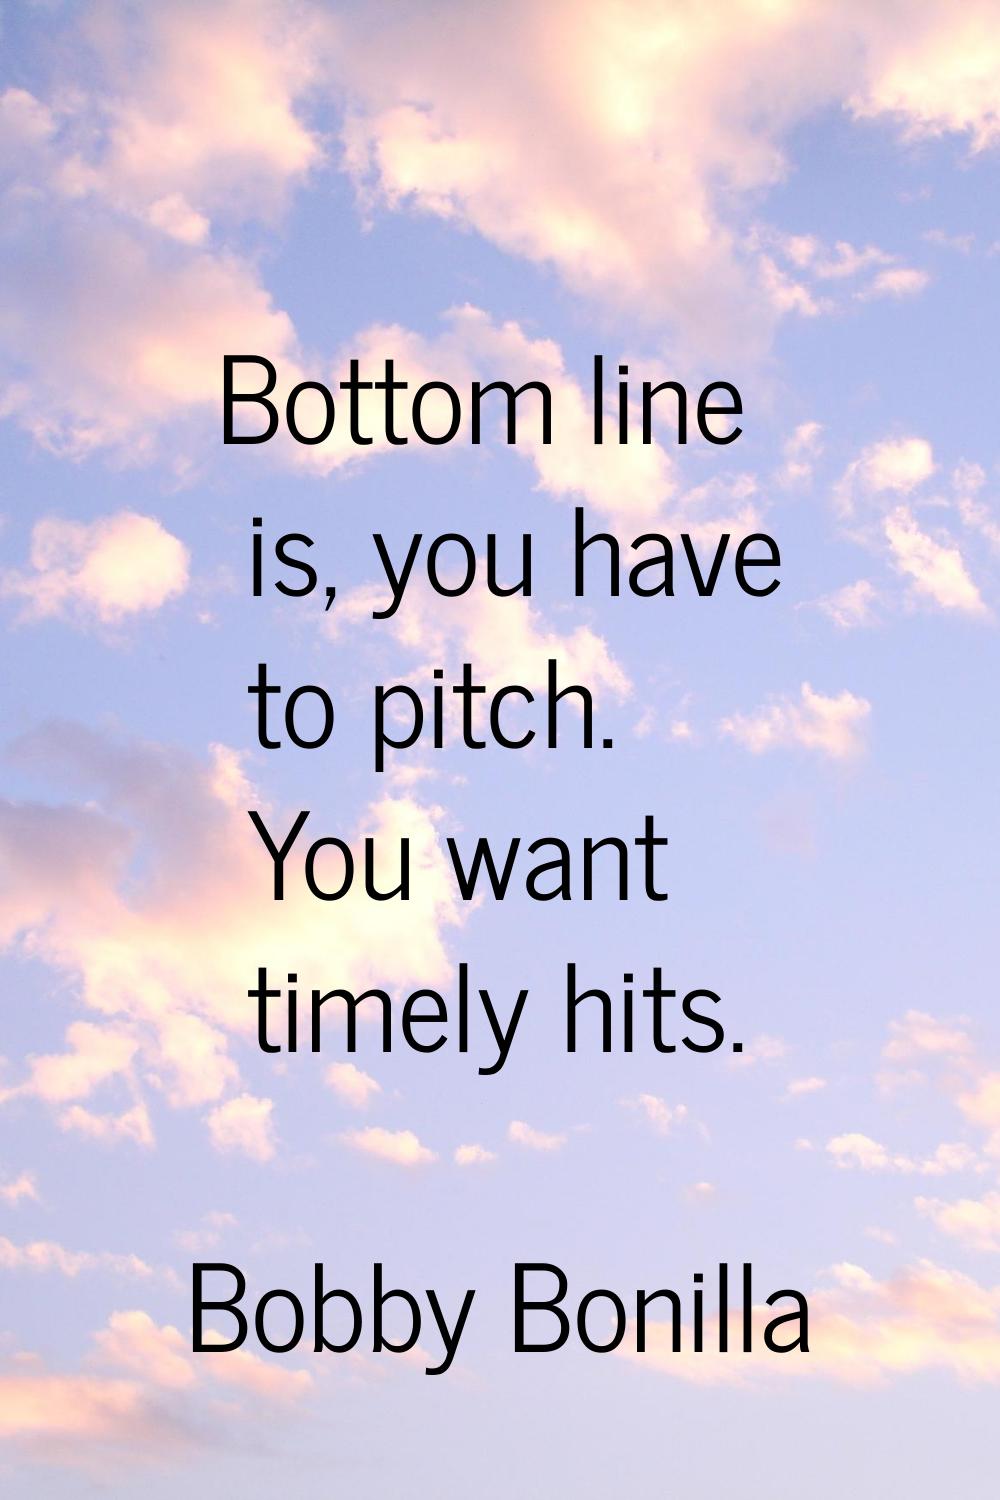 Bottom line is, you have to pitch. You want timely hits.